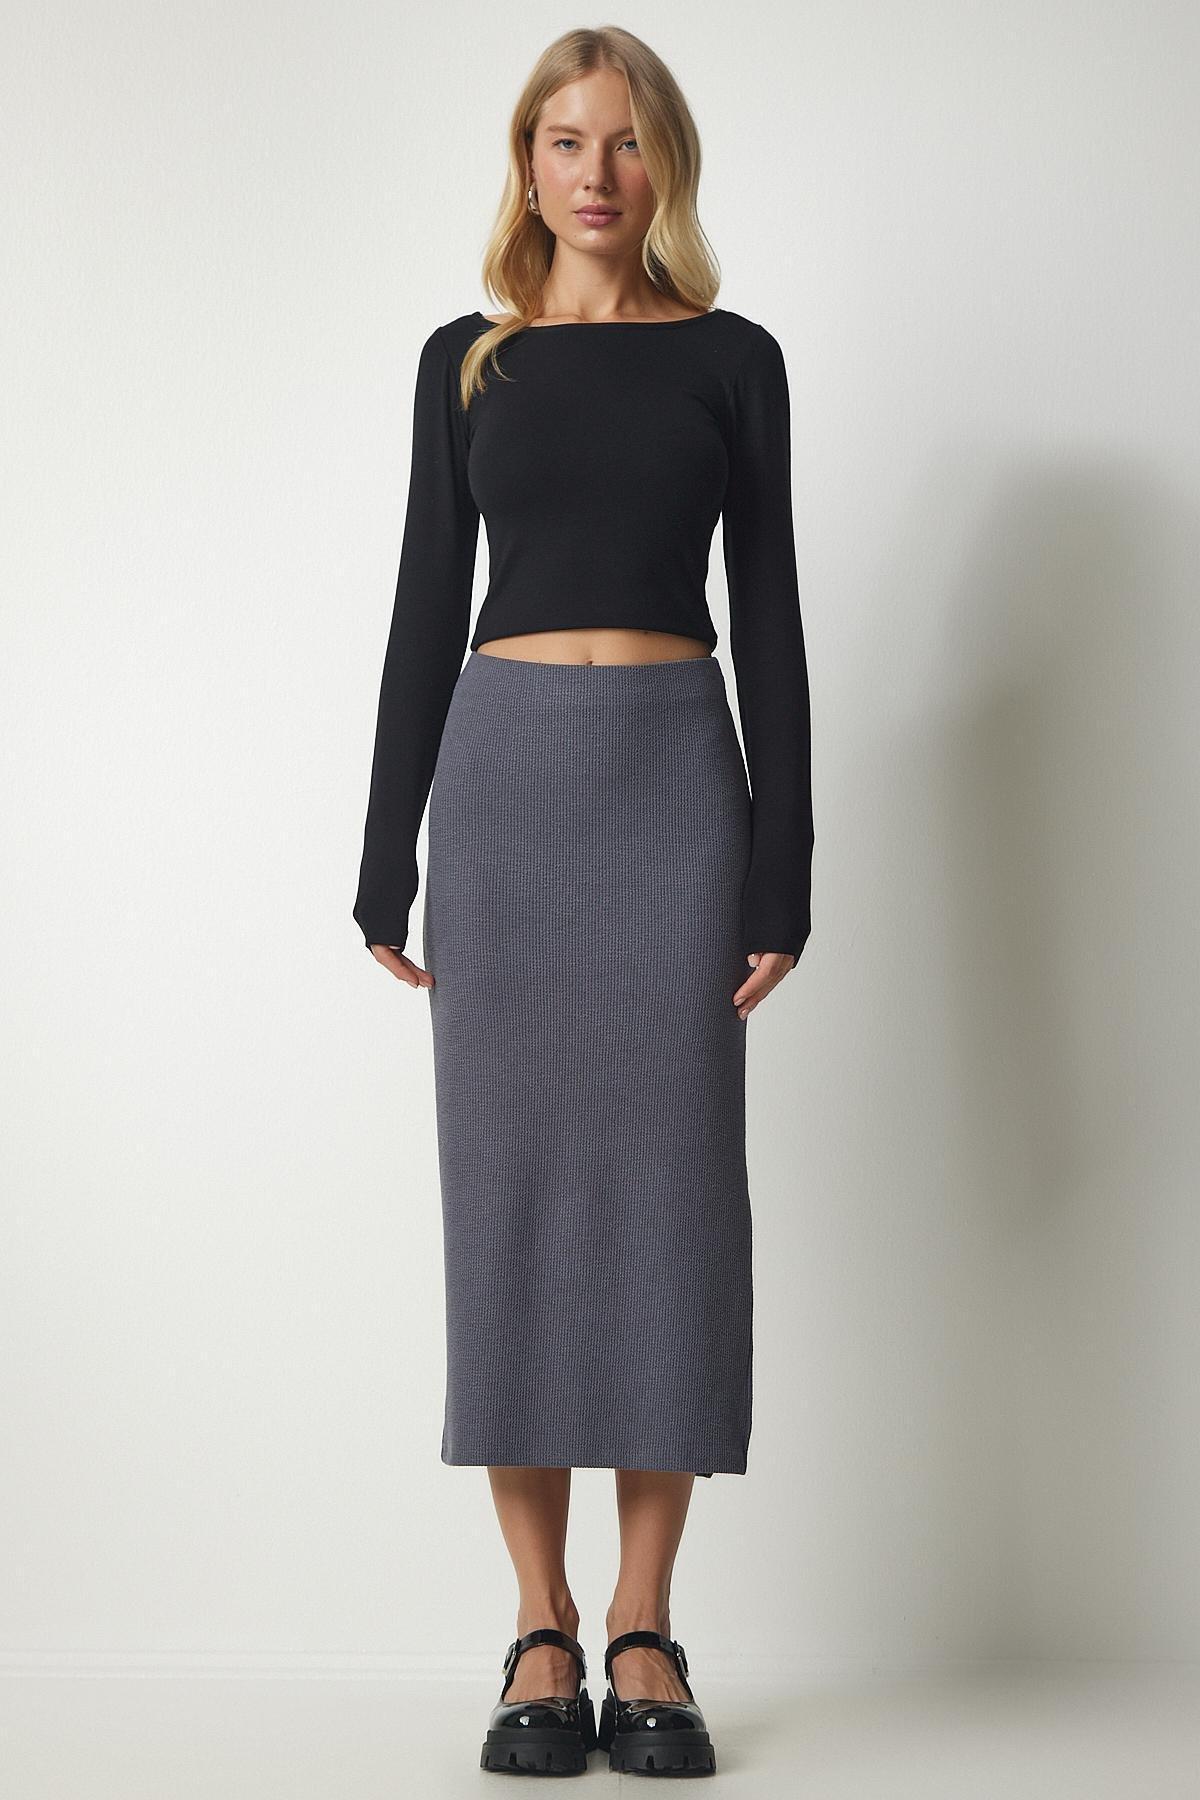 Happiness Istanbul - Gray Slotted Corduroy Knitted Pencil Skirt